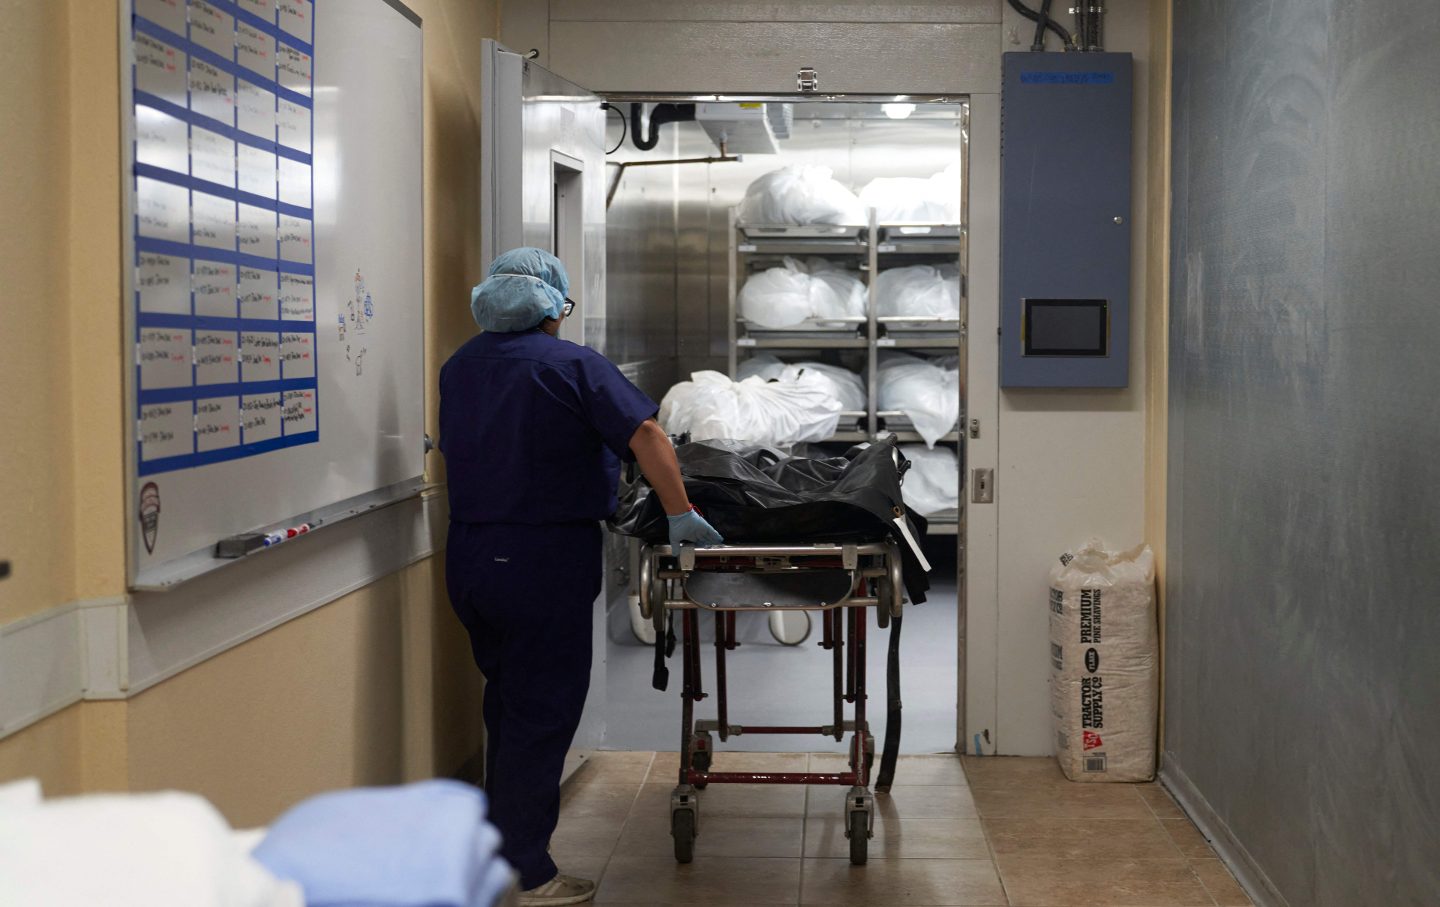 Chief Medical Examiner of Webb County, Dr. Corinne Stern’s autopsy assistant moves the body of an unidentified migrant to the autopsy room in Laredo, Tex., on October 12, 2022.